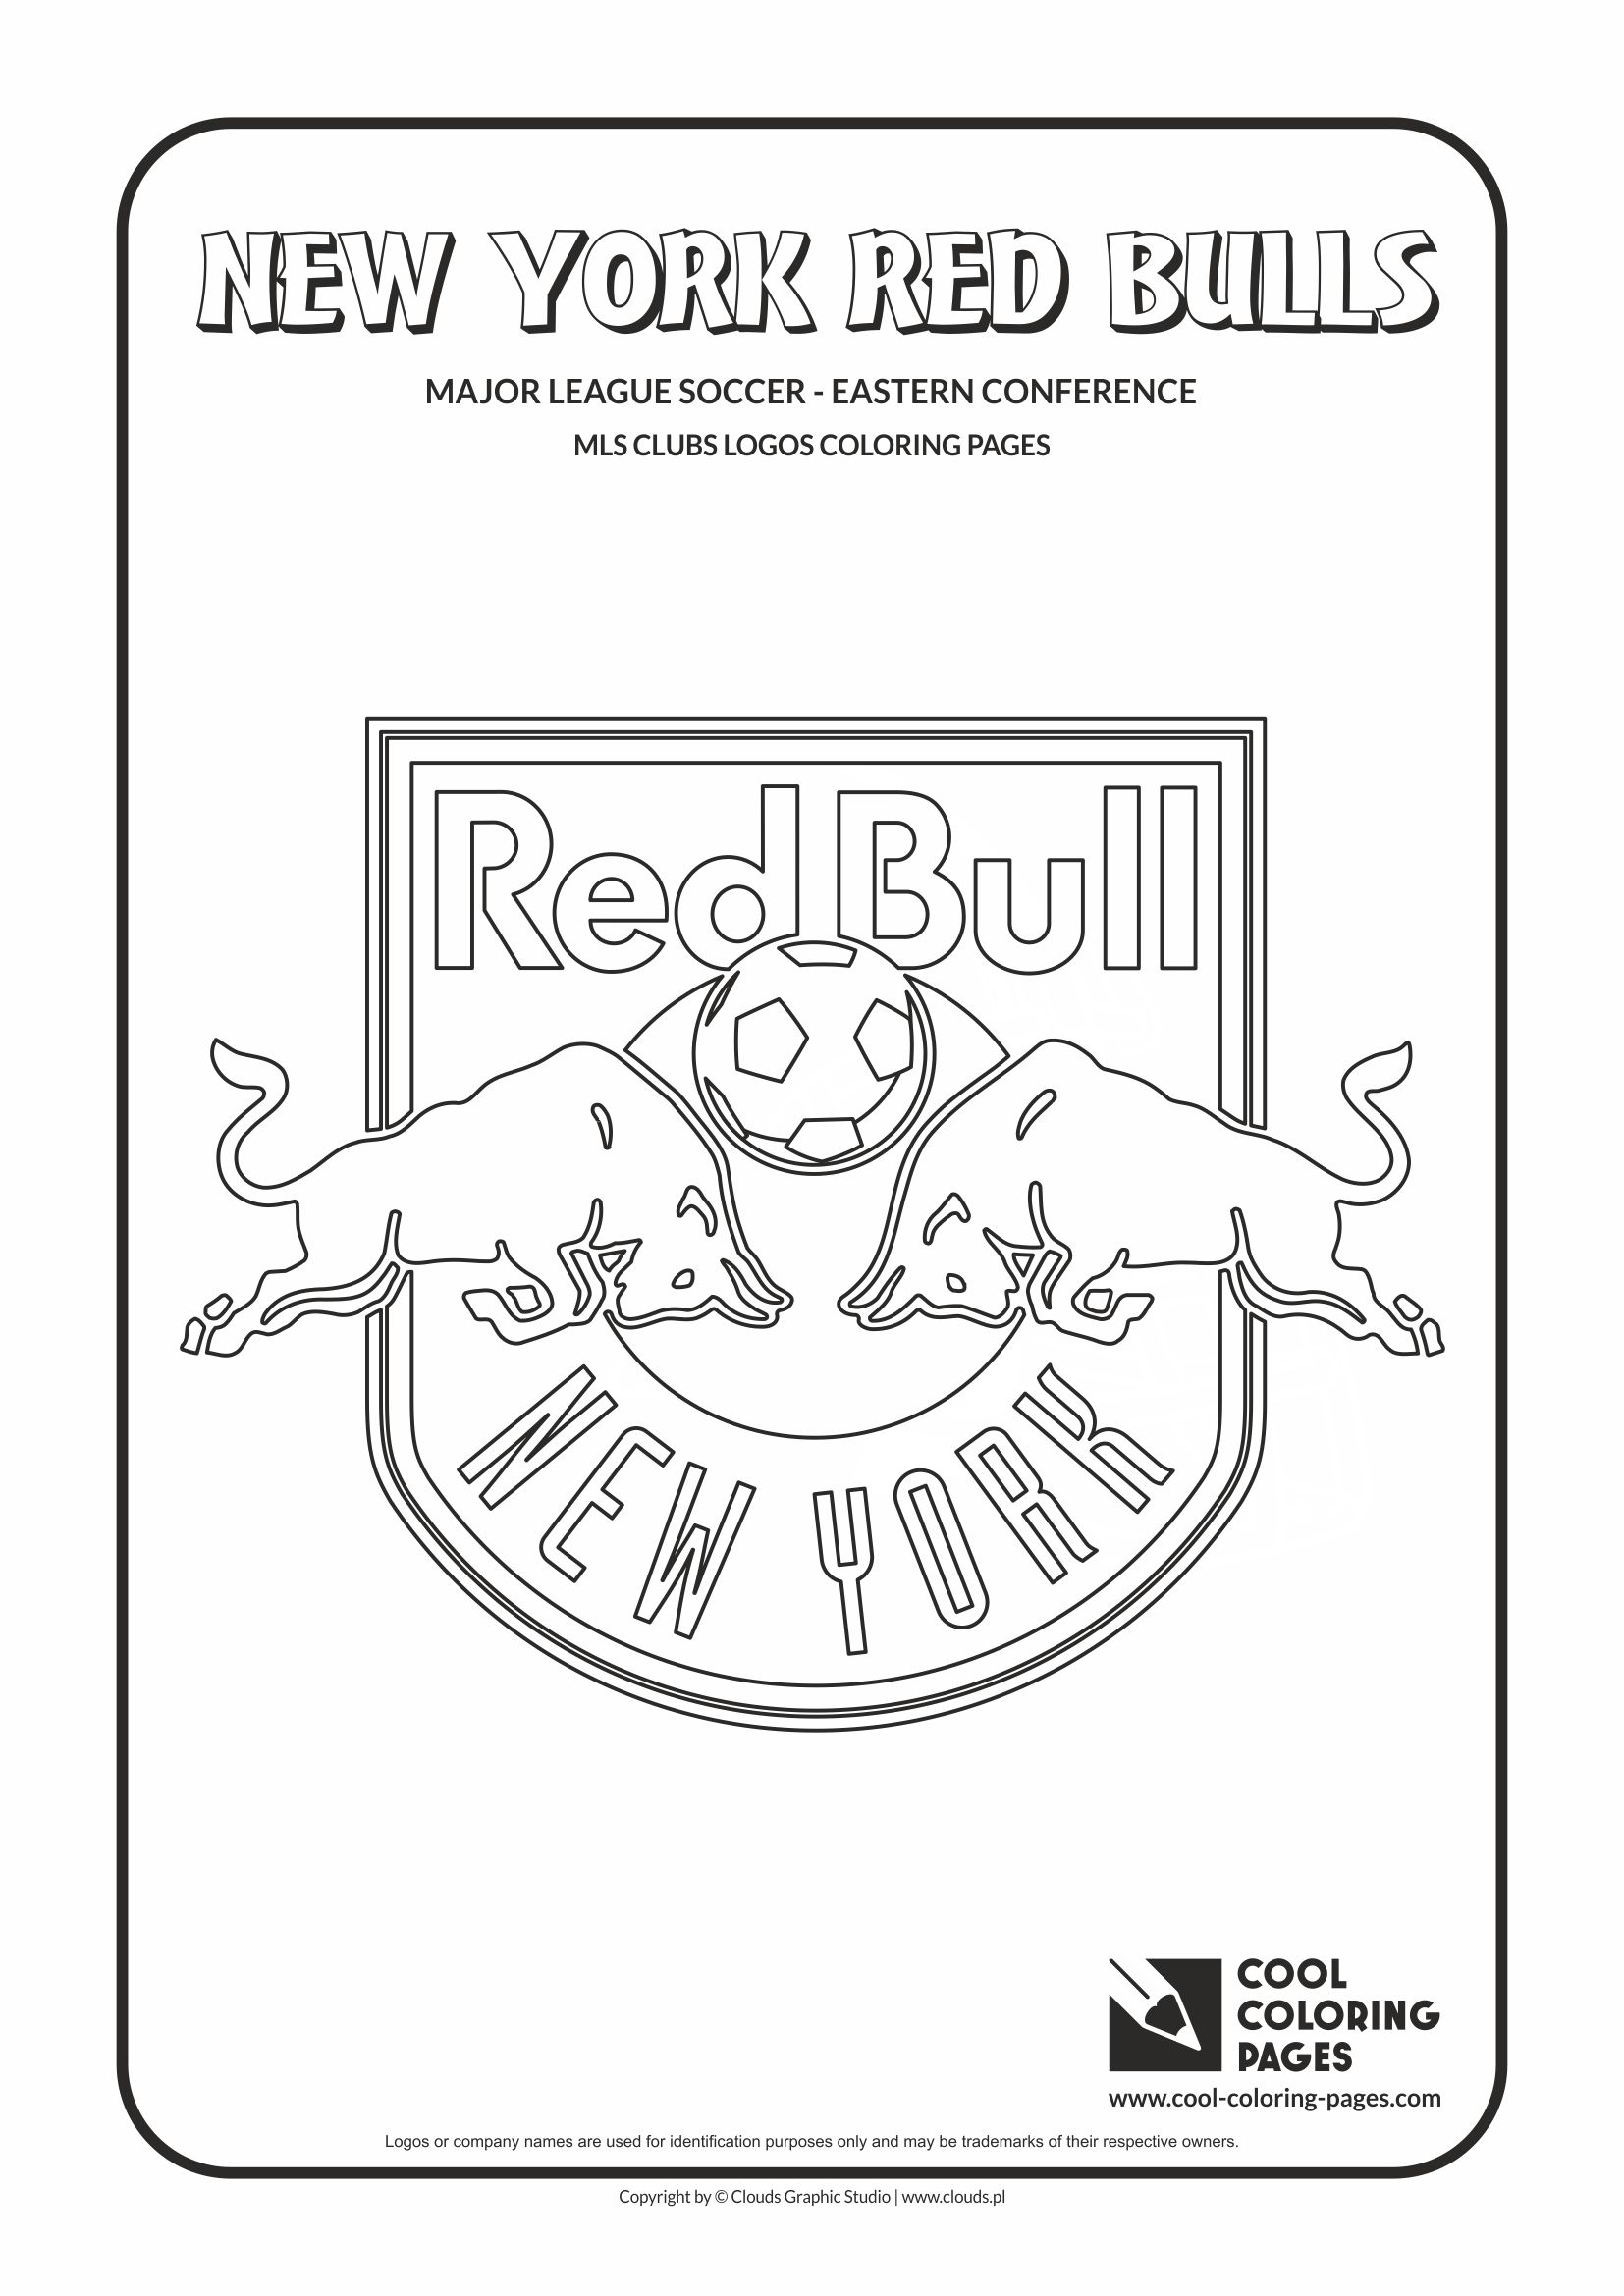 Cool Coloring Pages - Major League Soccer Logos - Eastern Conference / New York Red Bulls logo / Coloring page with New York Red Bulls logo